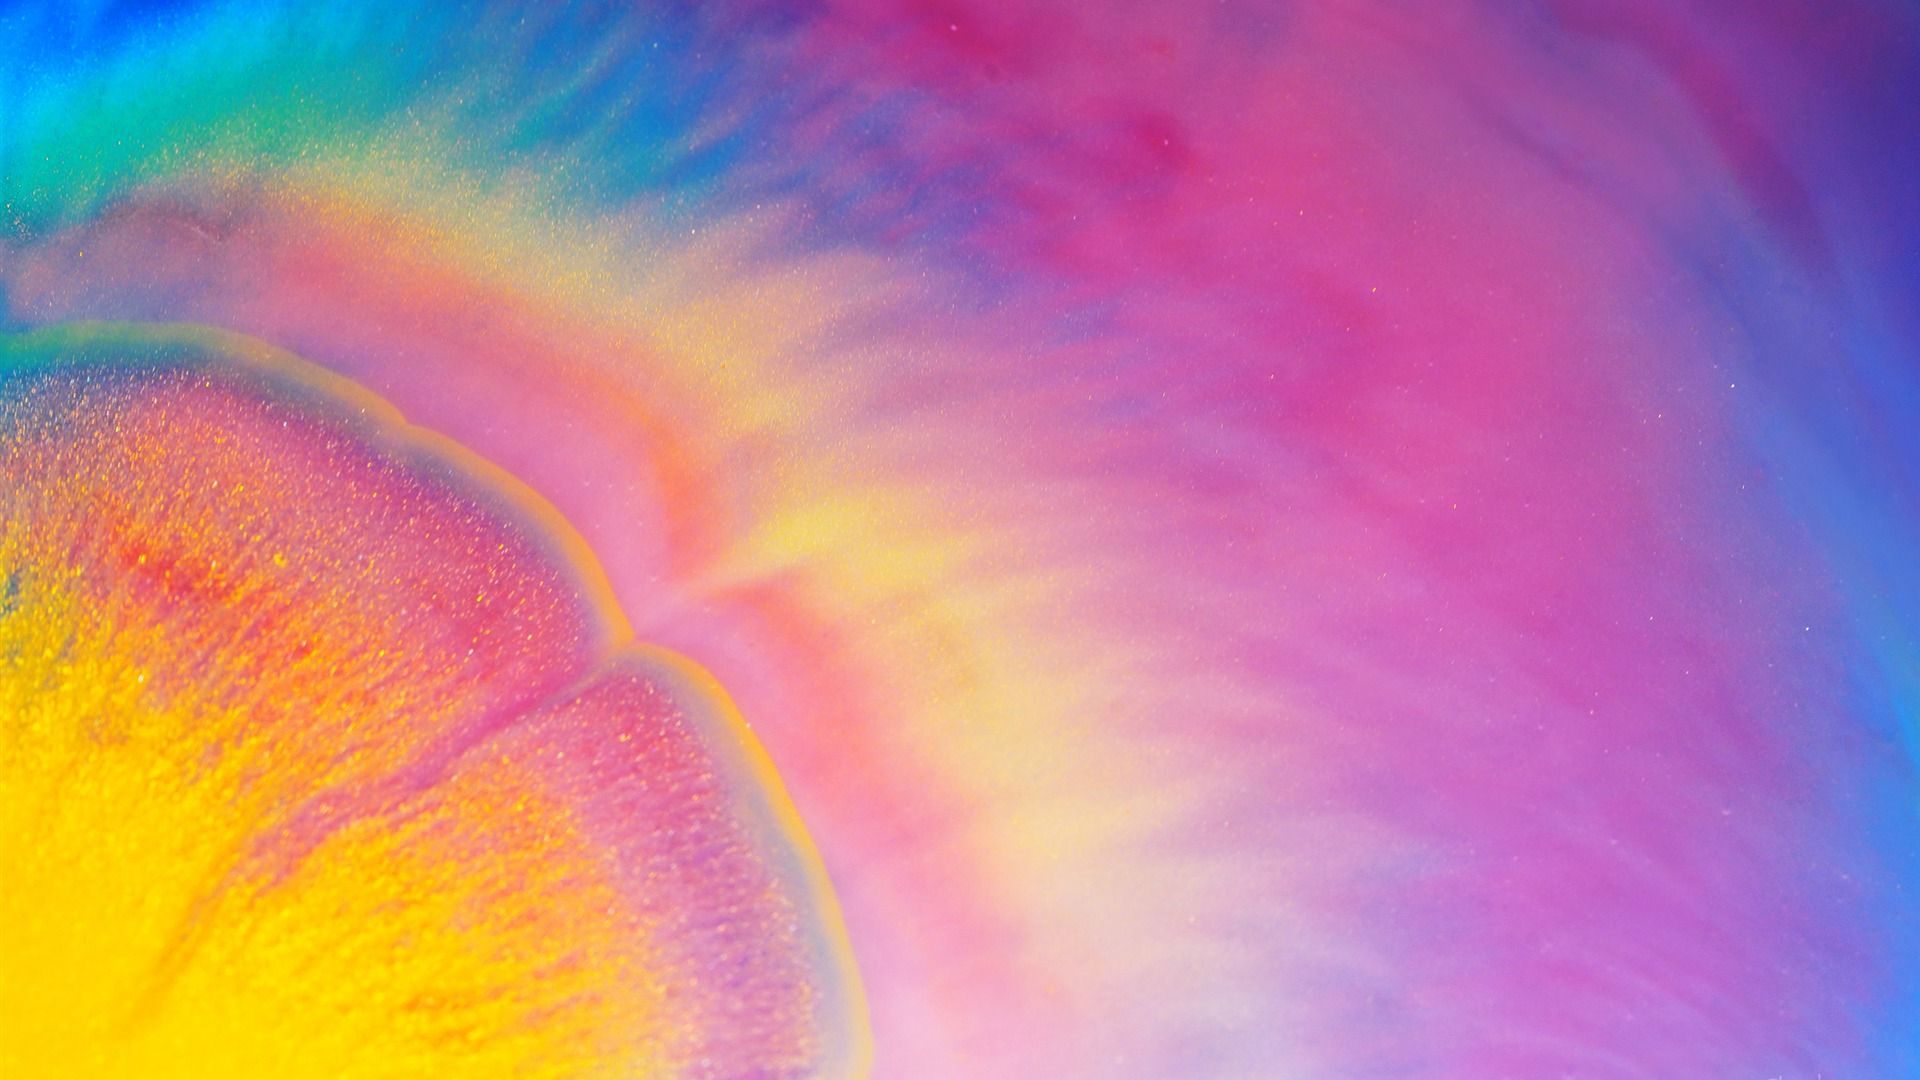 Rainbow download free wallpapers for pc in hd